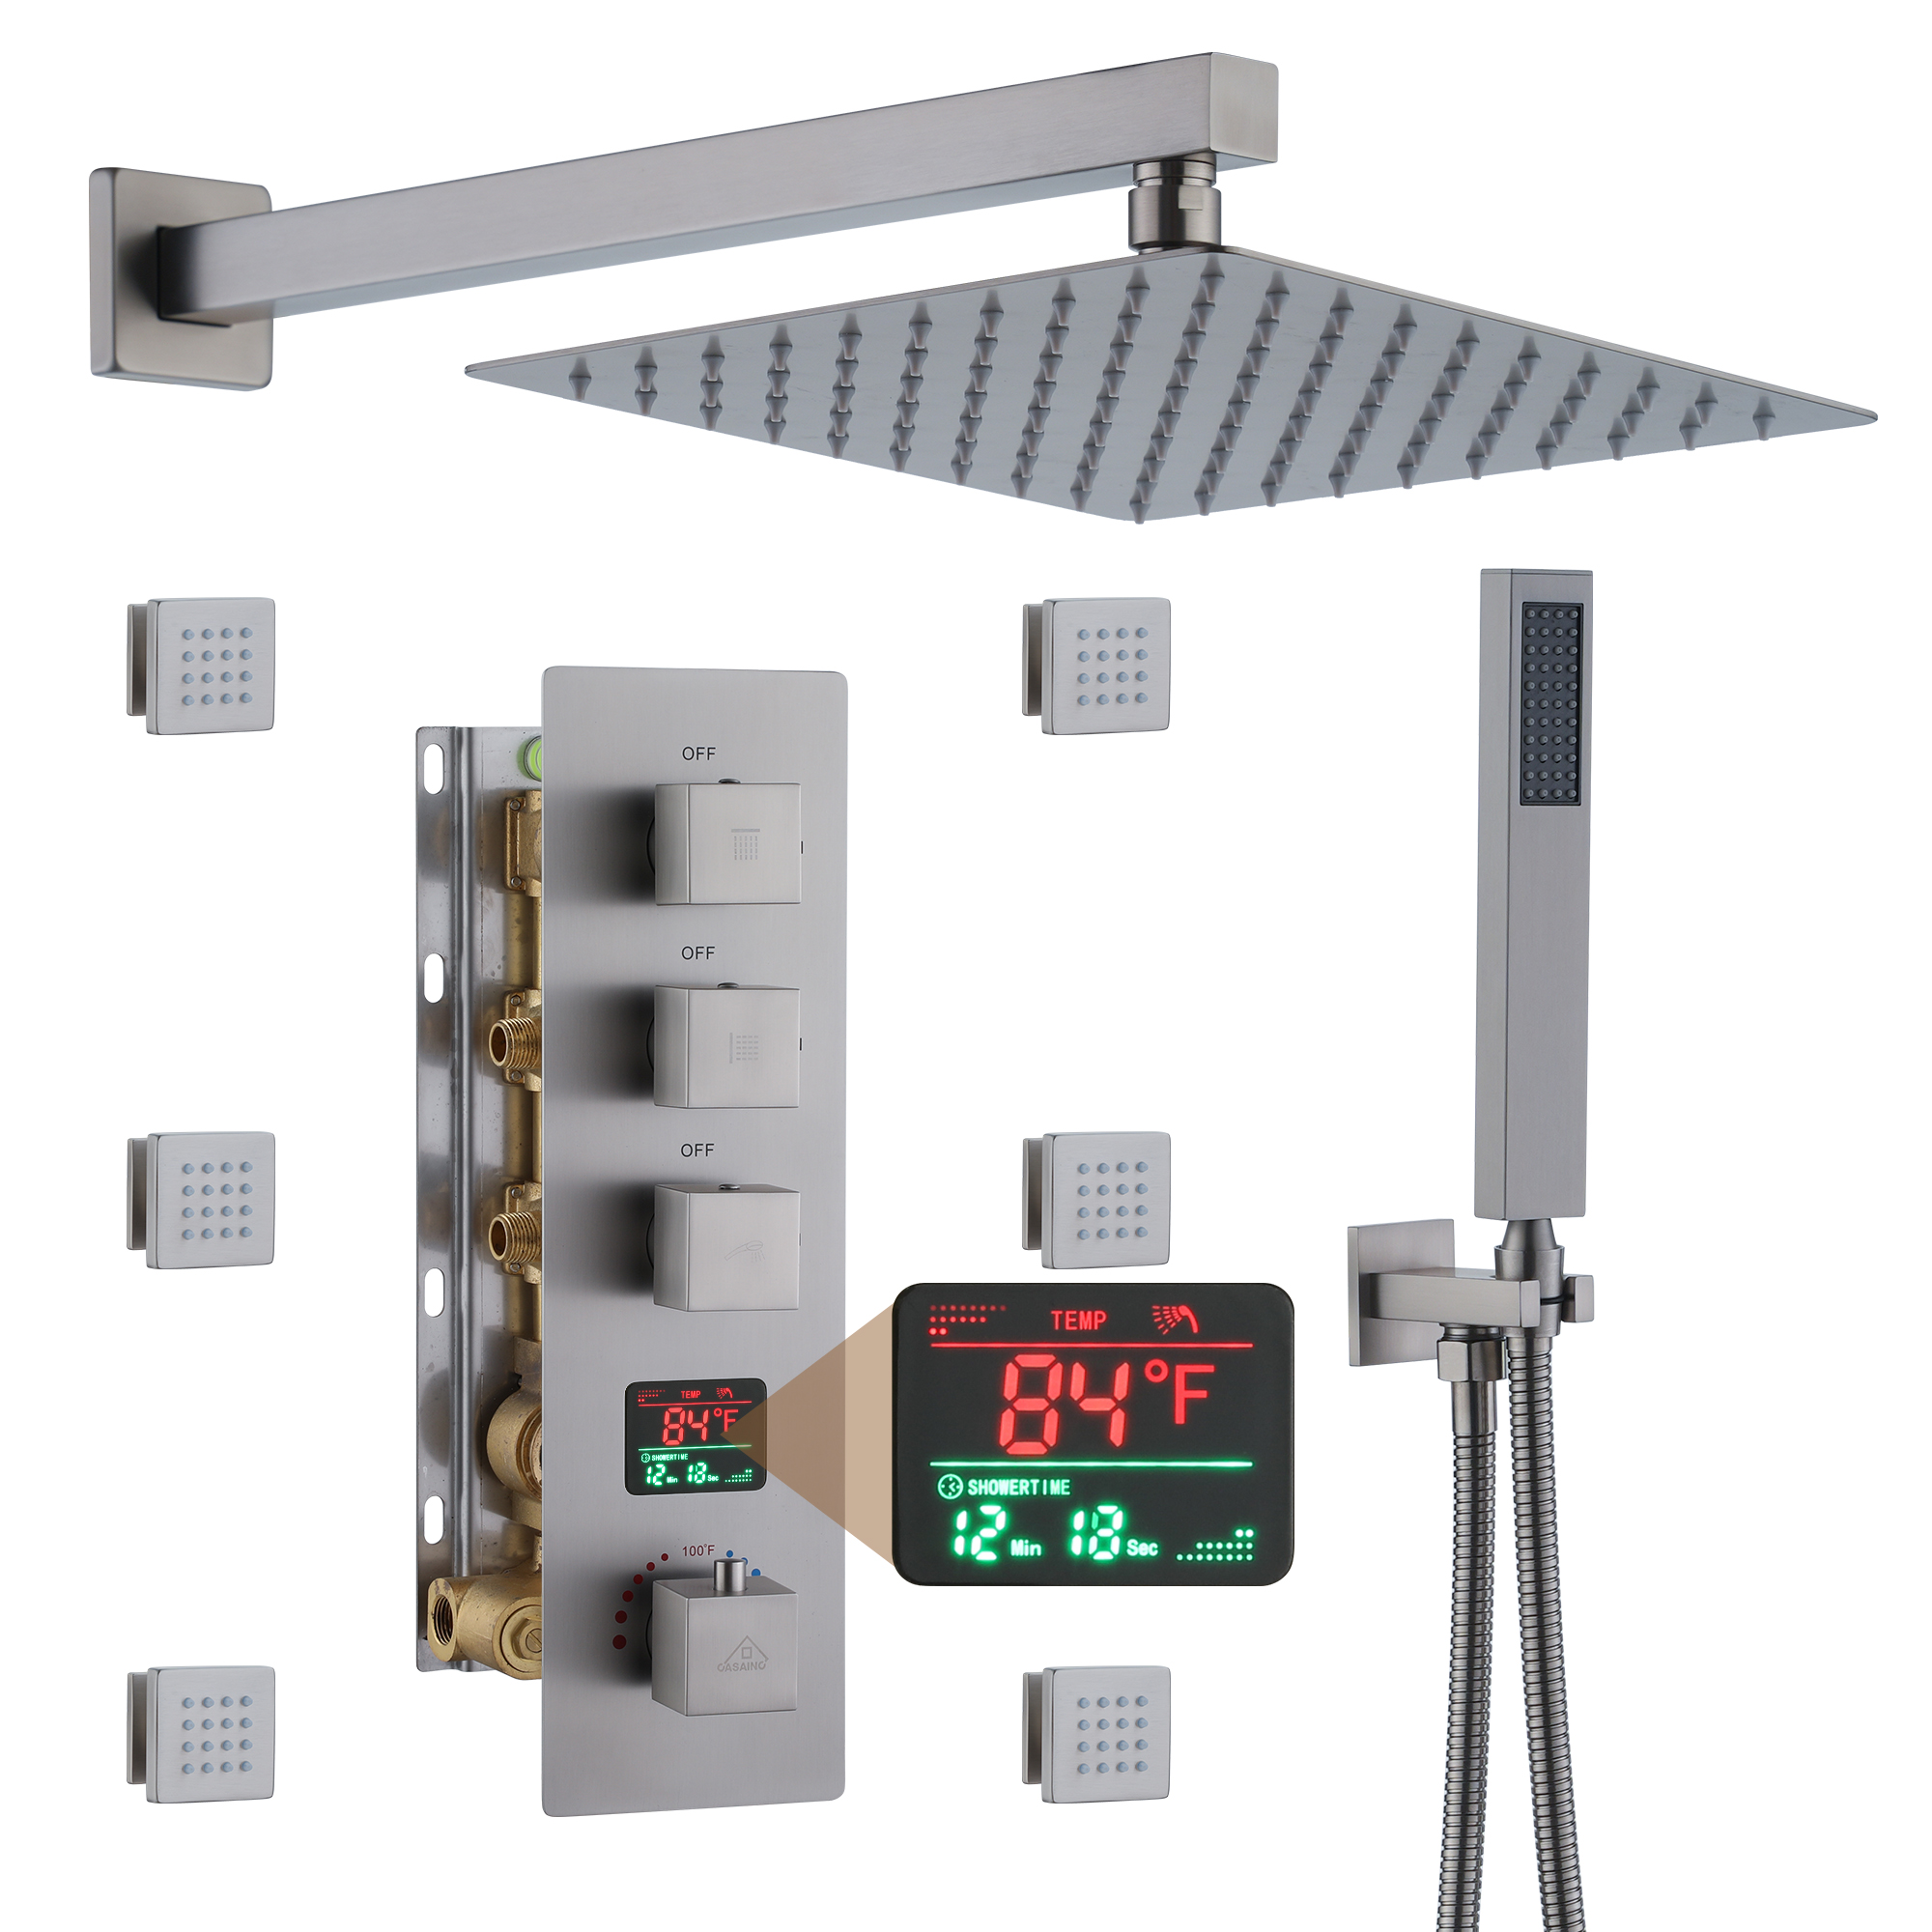 Deluxe 3-Function Shower With Digital Display Of Temperature Shower System With 6 Side Jets